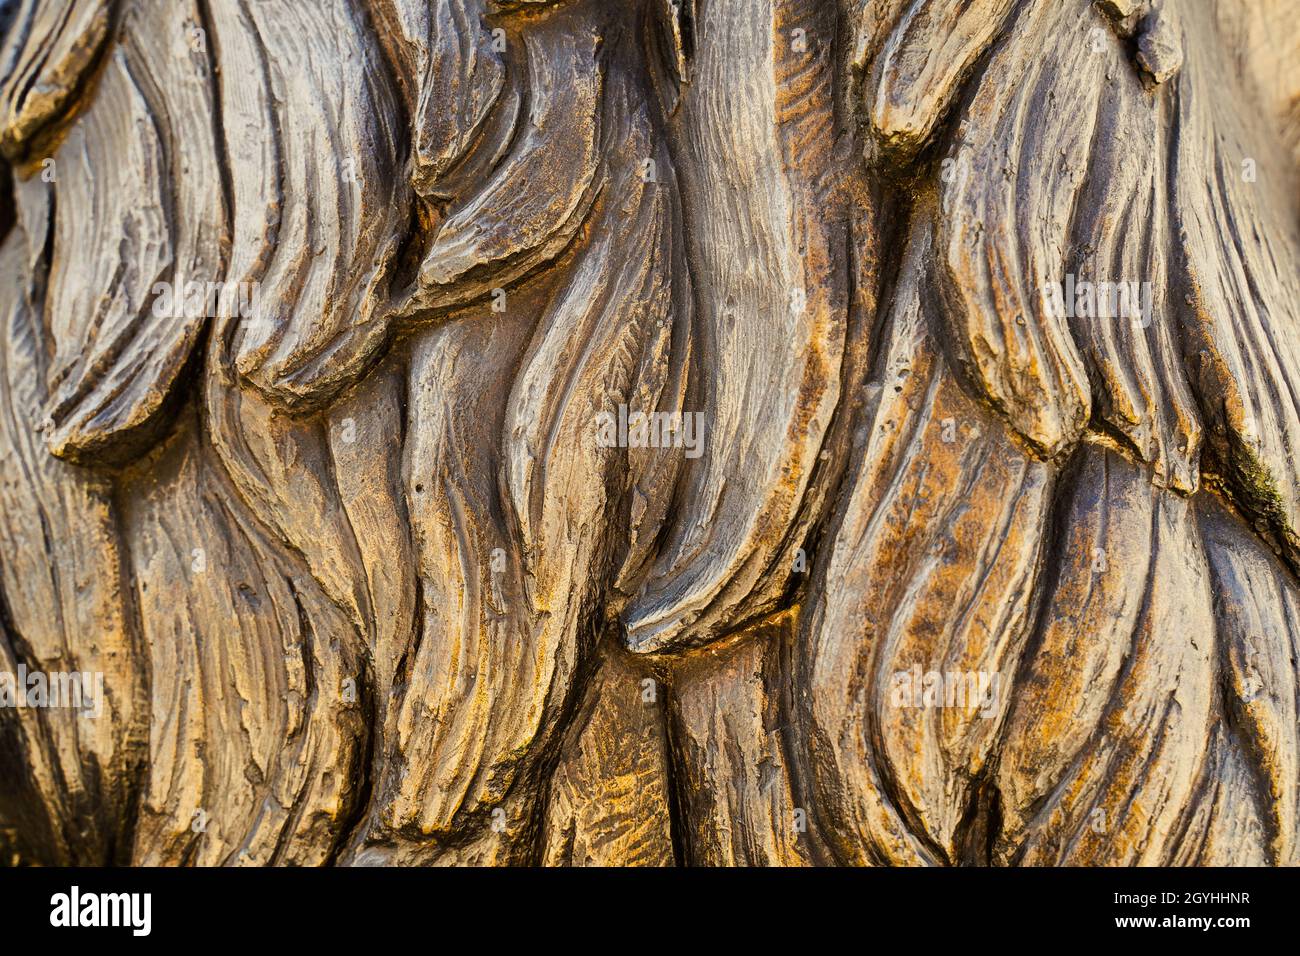 closeup front view of bronze sculpture strands of hair texture Stock Photo